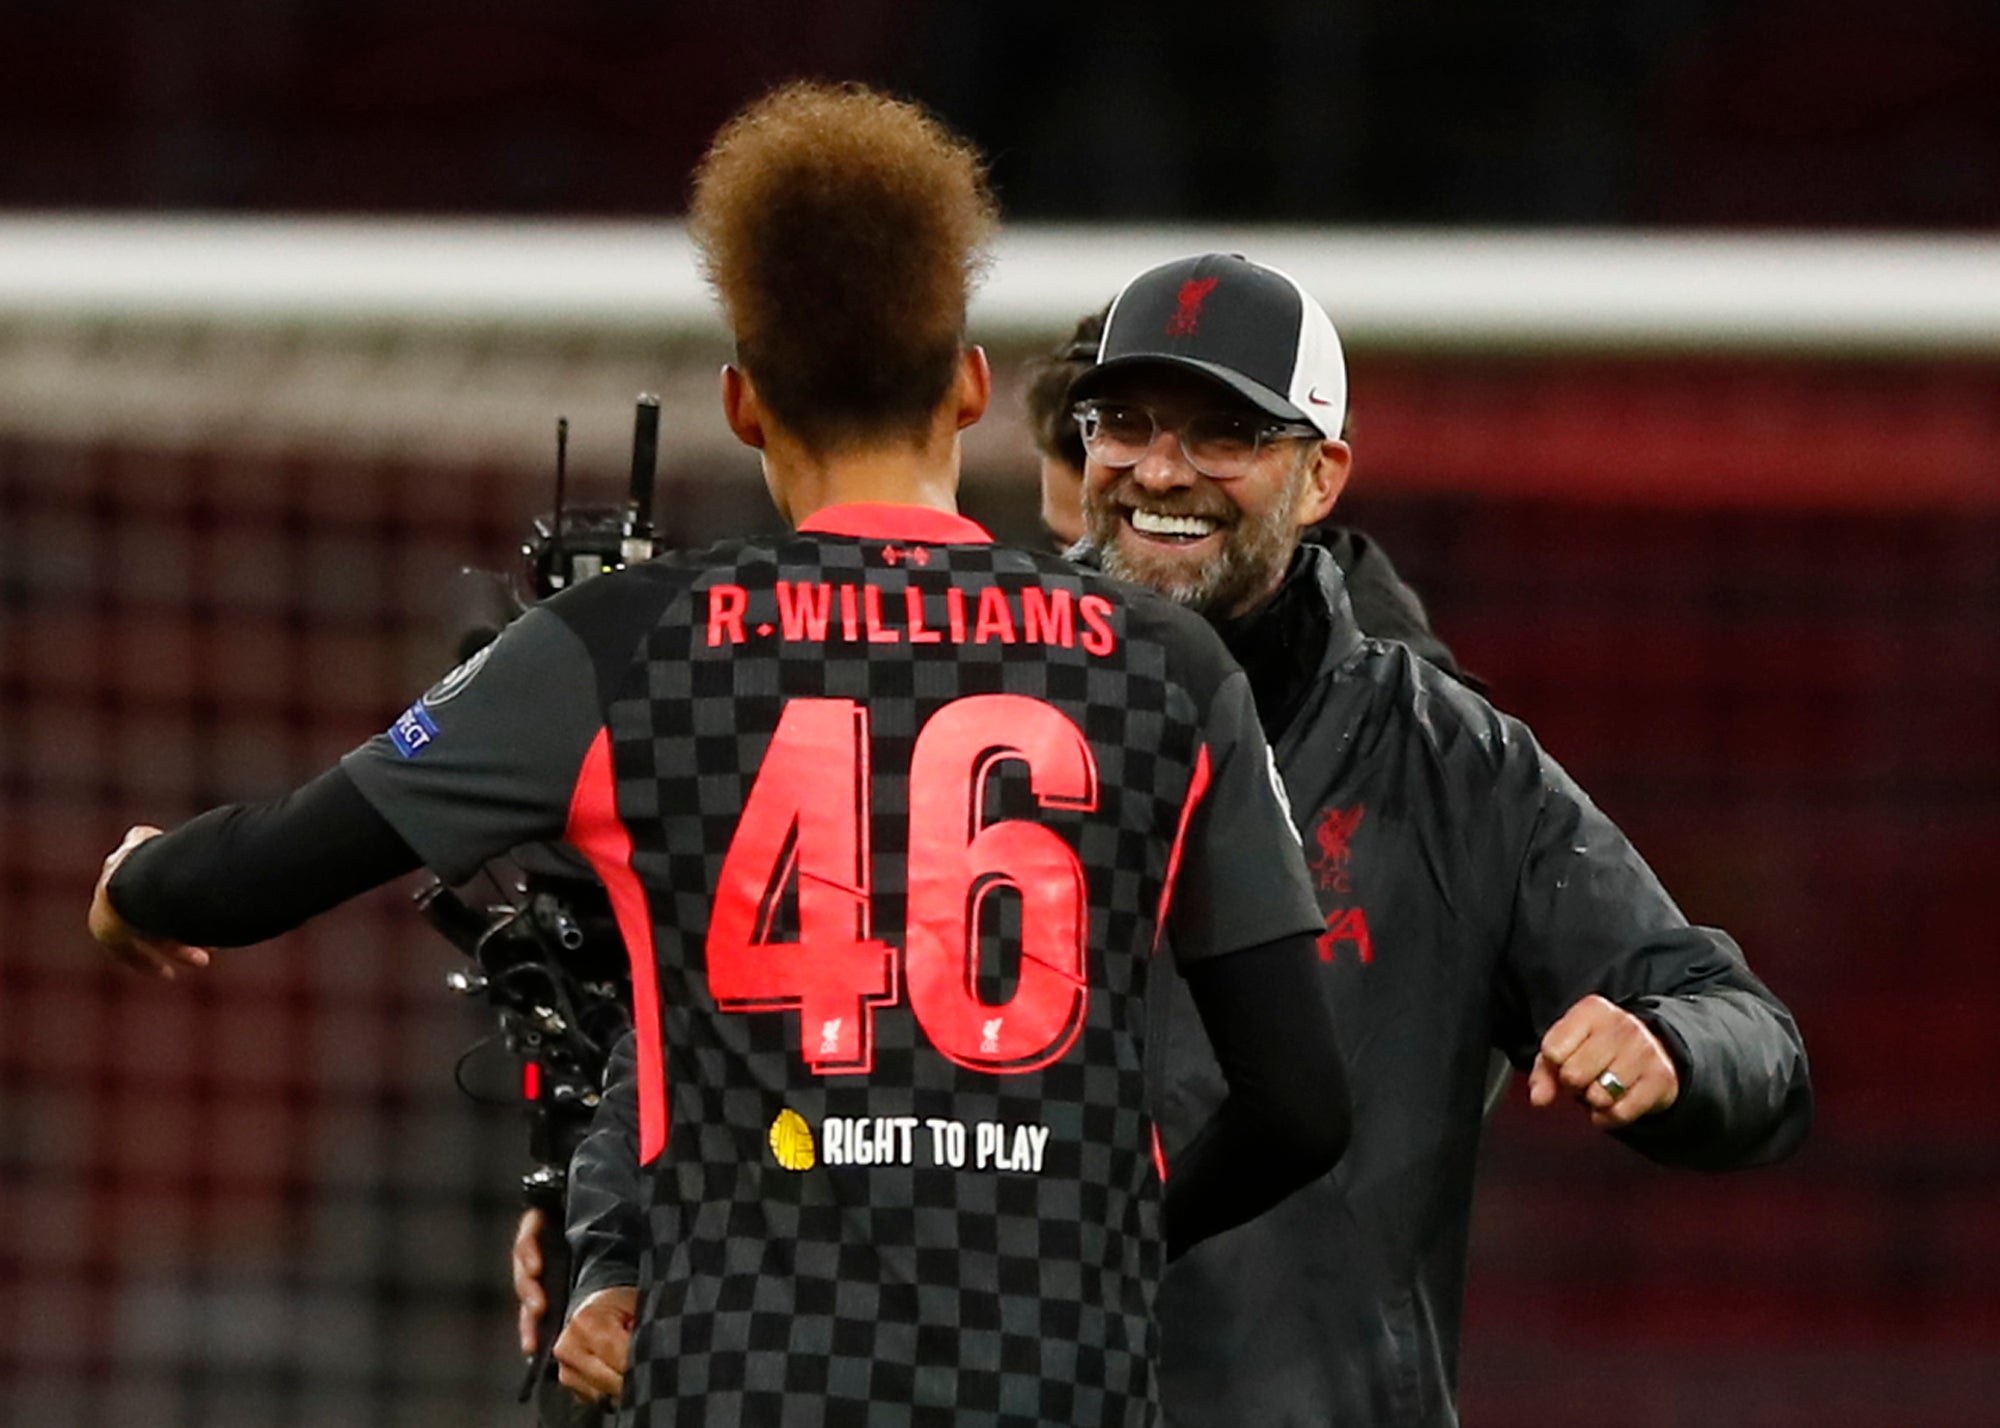 Jurgen Klopp was pleased to give minutes to 19-year-old Rhys Williams